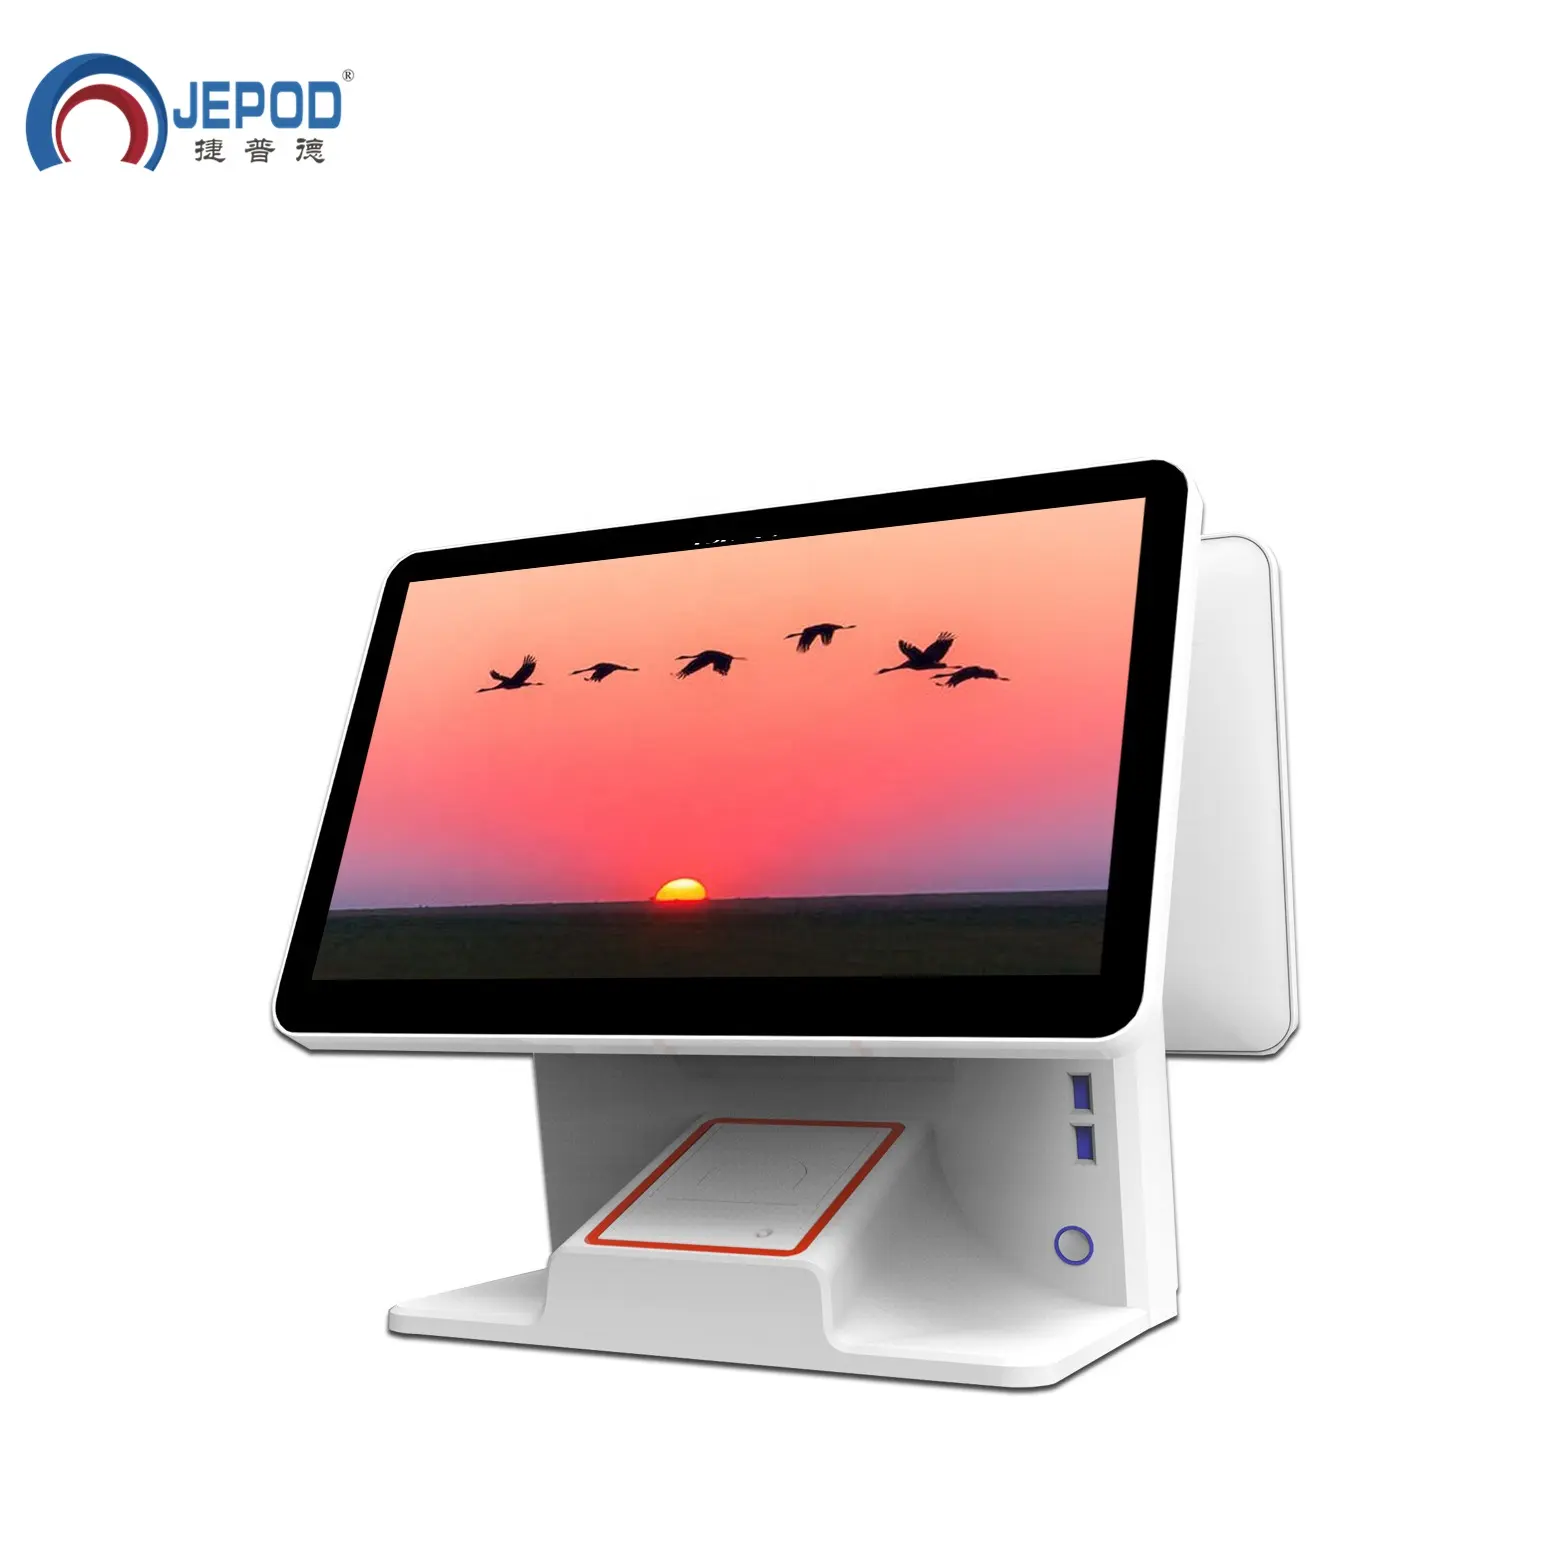 JEPOD JP-L7TS High Quality Fanless 15.6 zoll touch pos system computer/POS Systems für Retail Store